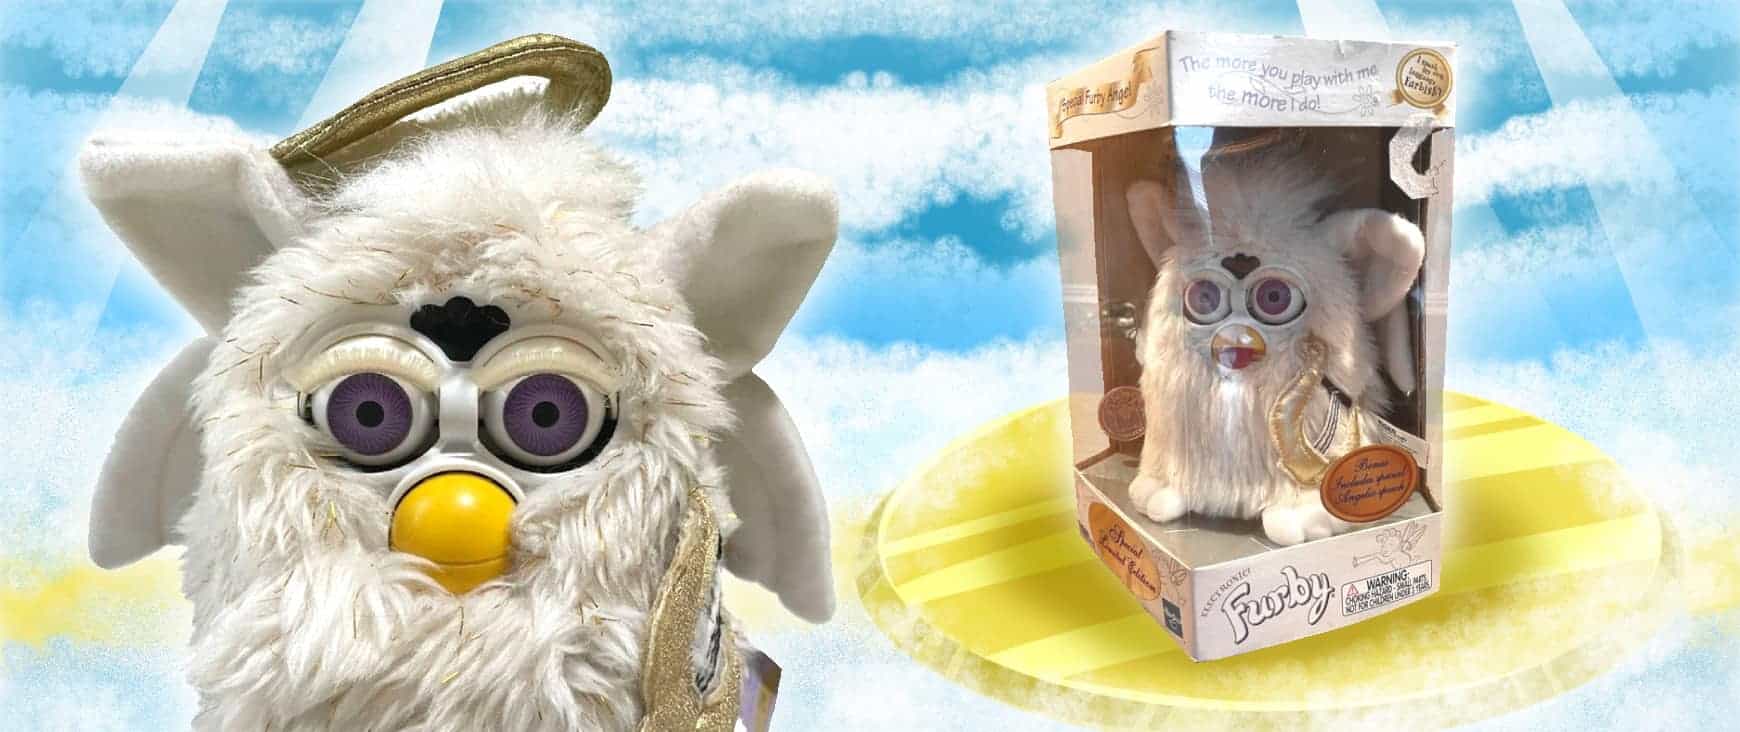 Your Old Furbies Could Be Worth Up to $5,000 on